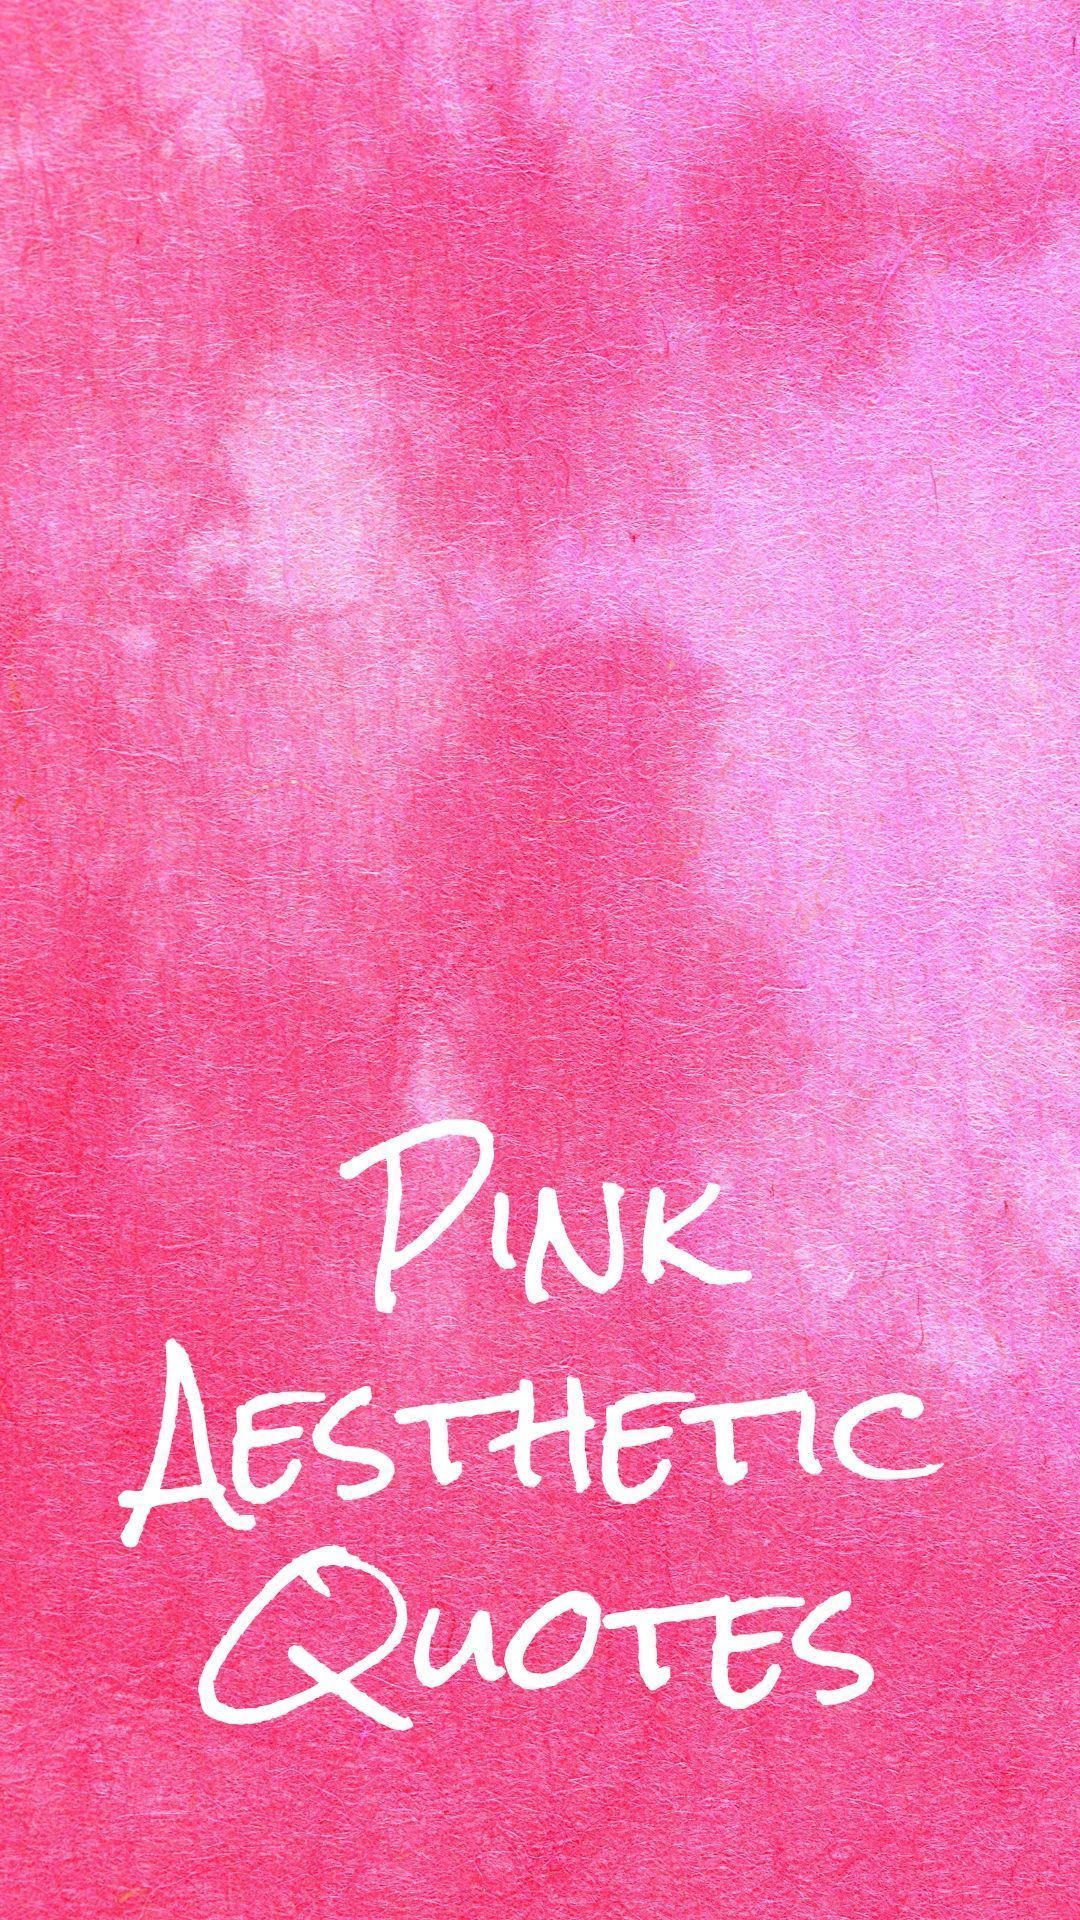  Marken Hintergrundbild 1080x1920. Pink Aesthetic Wallpaper with Quotes and Collages